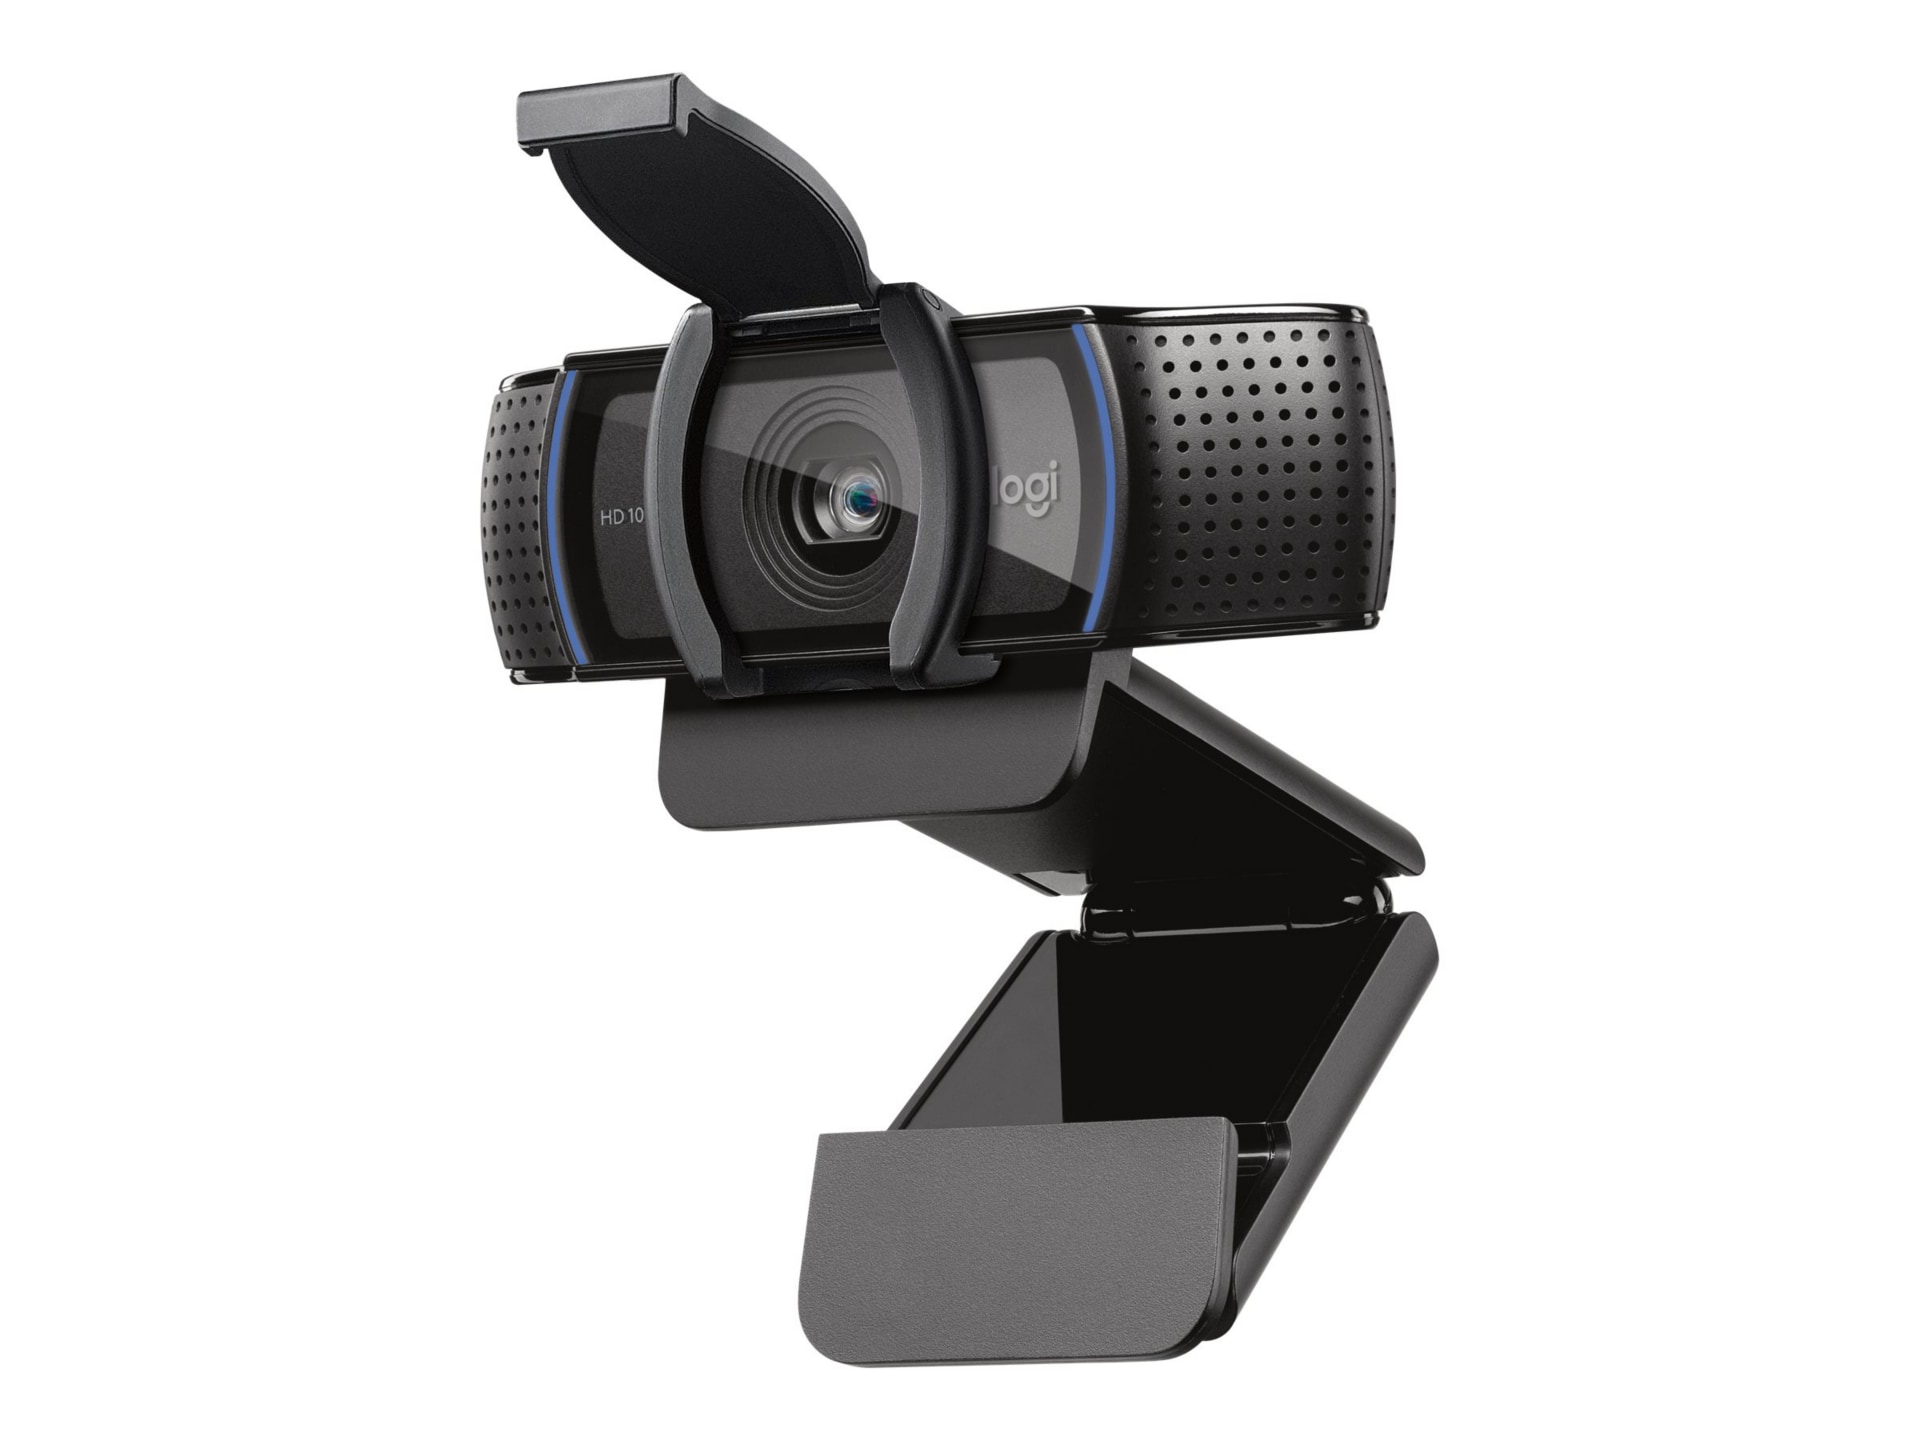 Webcam, microphone and lighting combined for video chat all-in-one